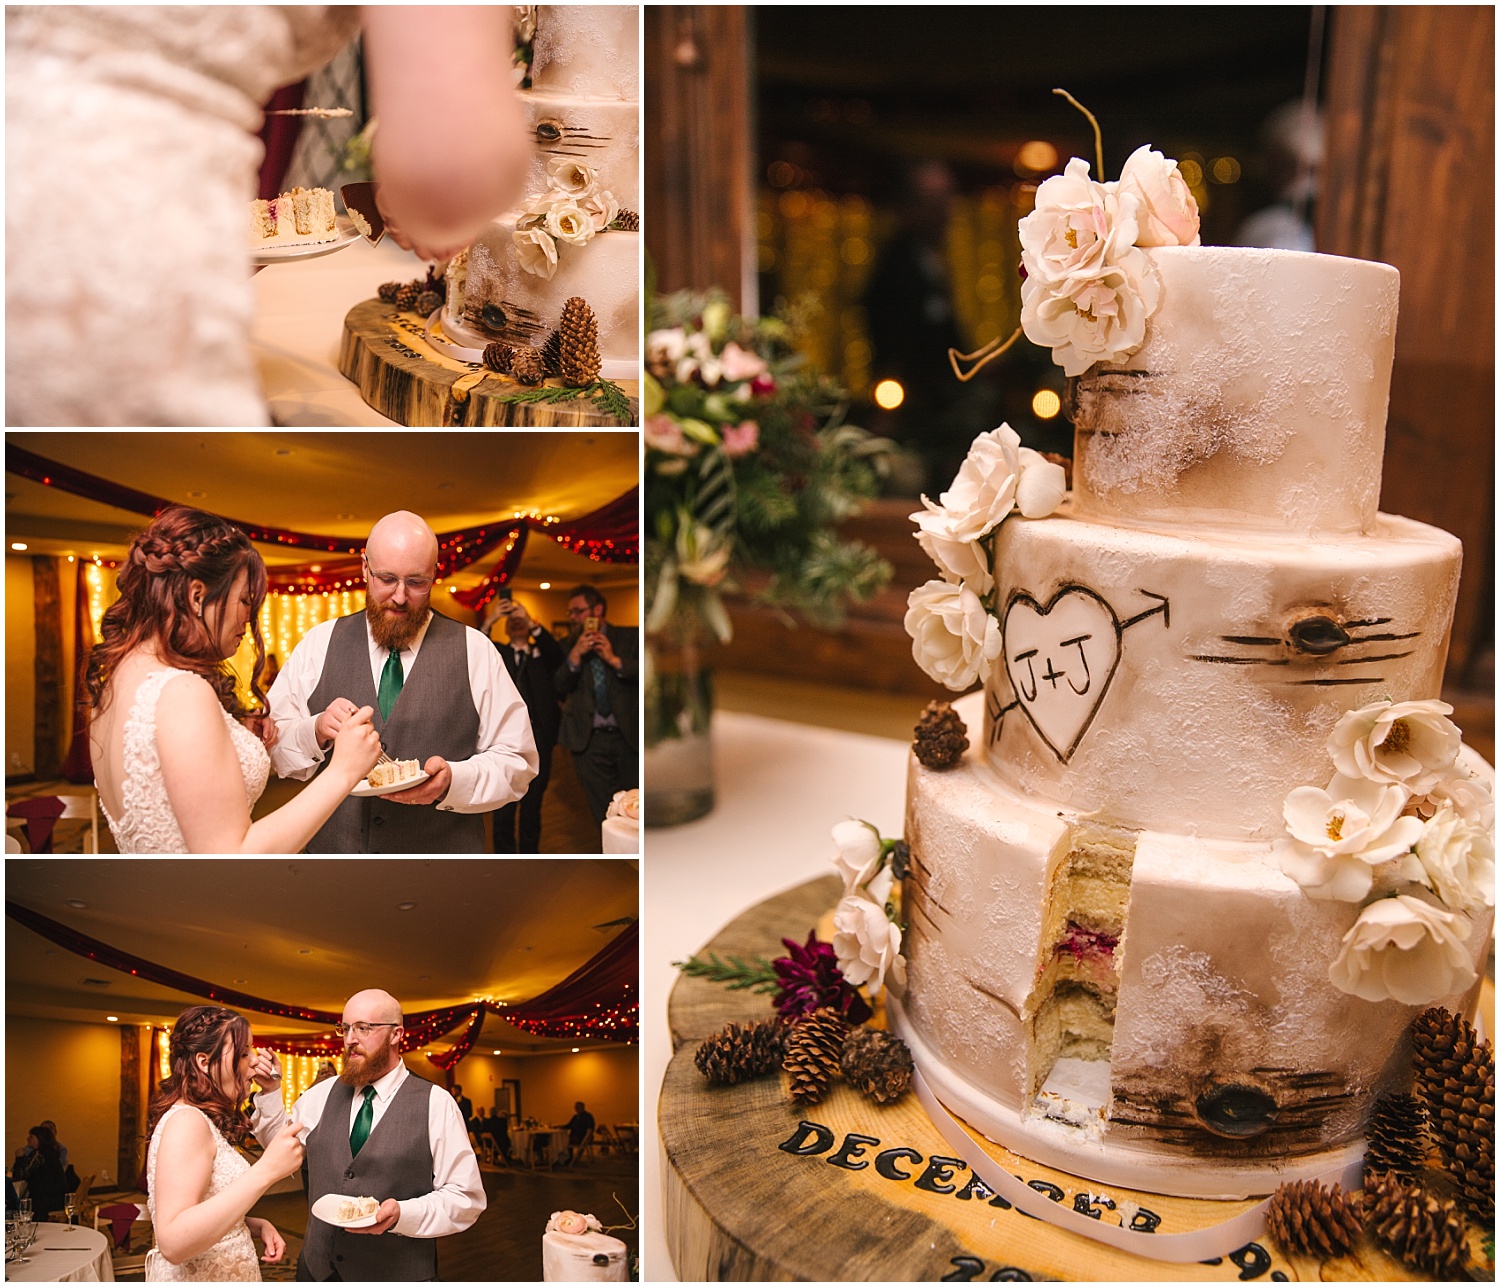 bride and groom cutting the cake at The Lodge at Breckenridge winter wedding reception